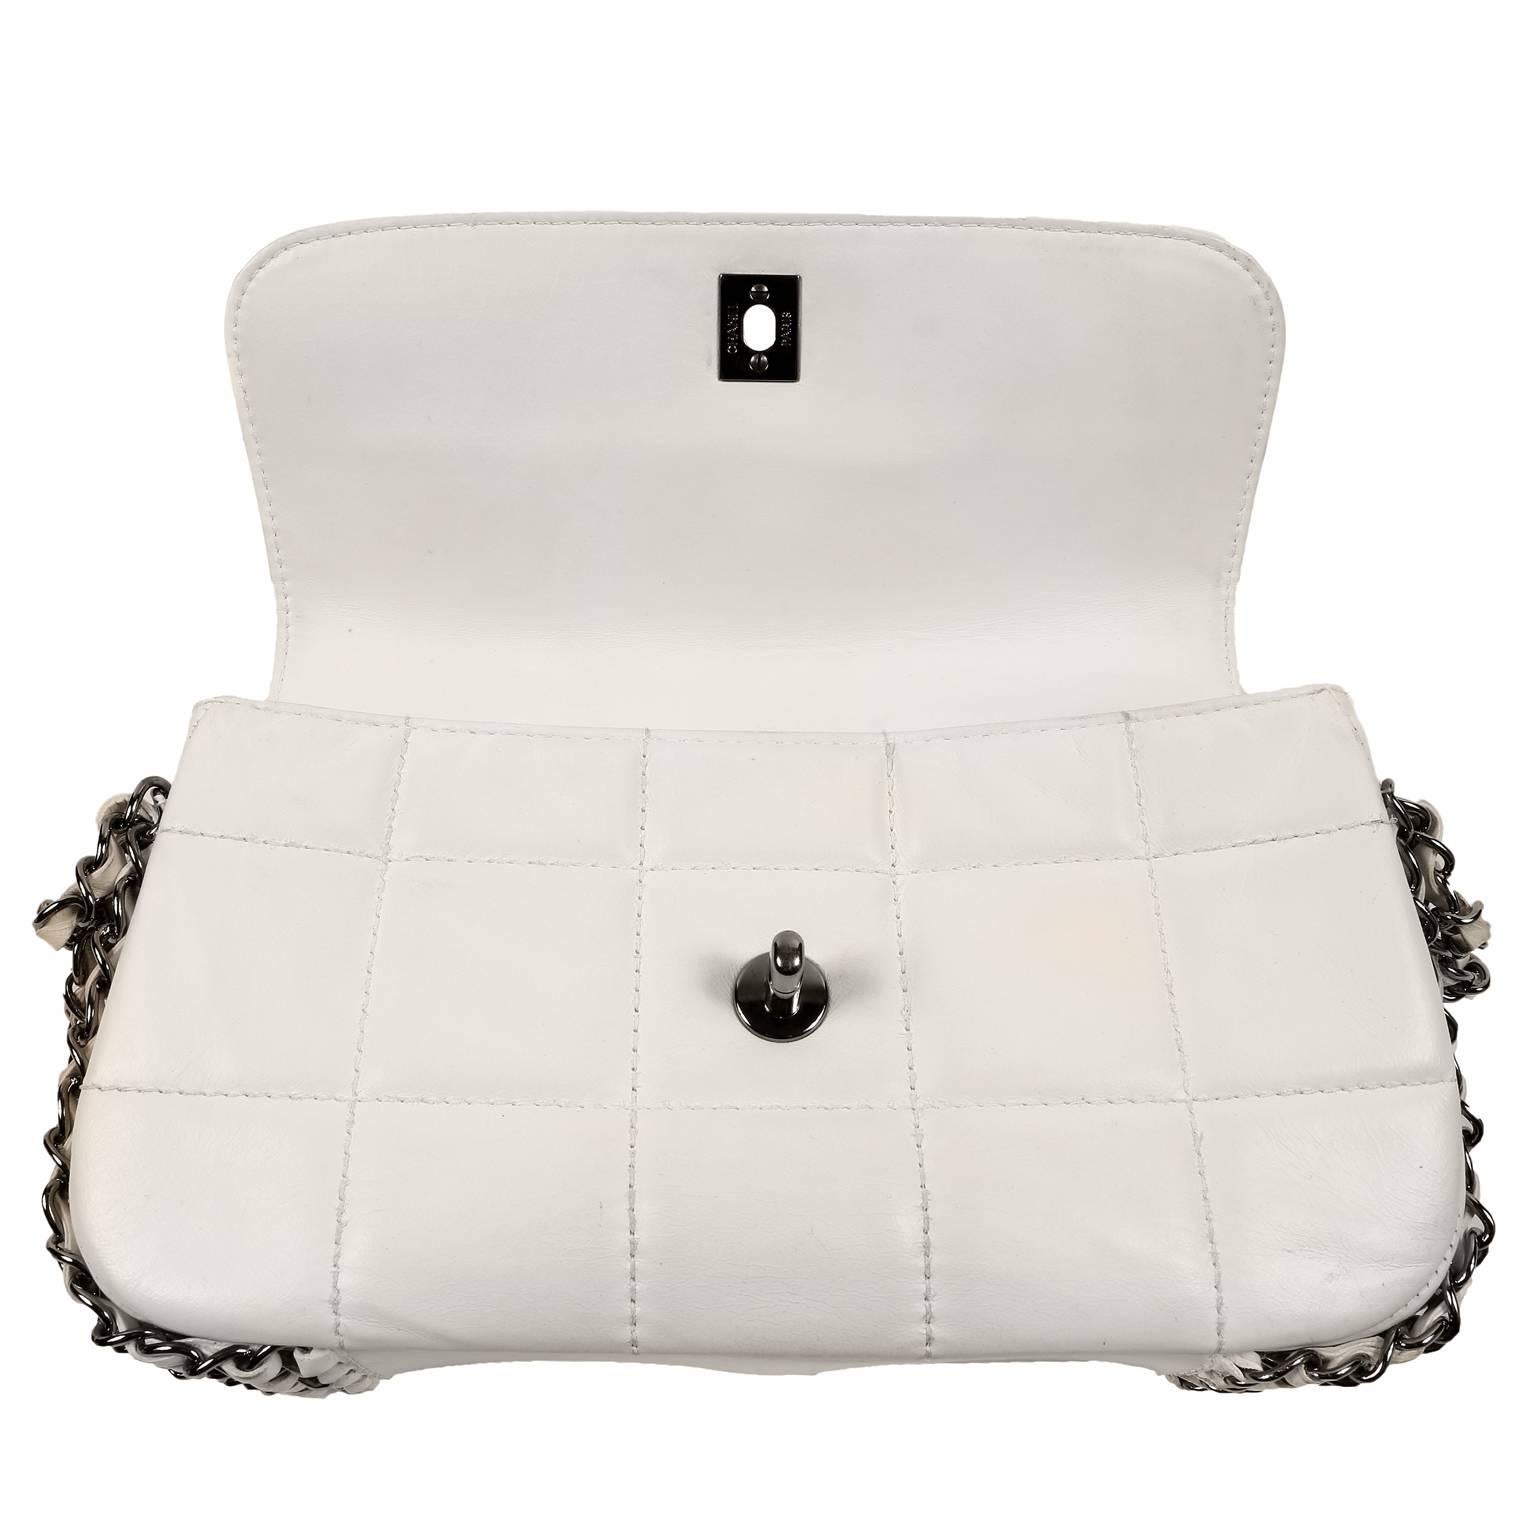 Women's Chanel White Leather Multi Chain Flap Bag- Special Edition